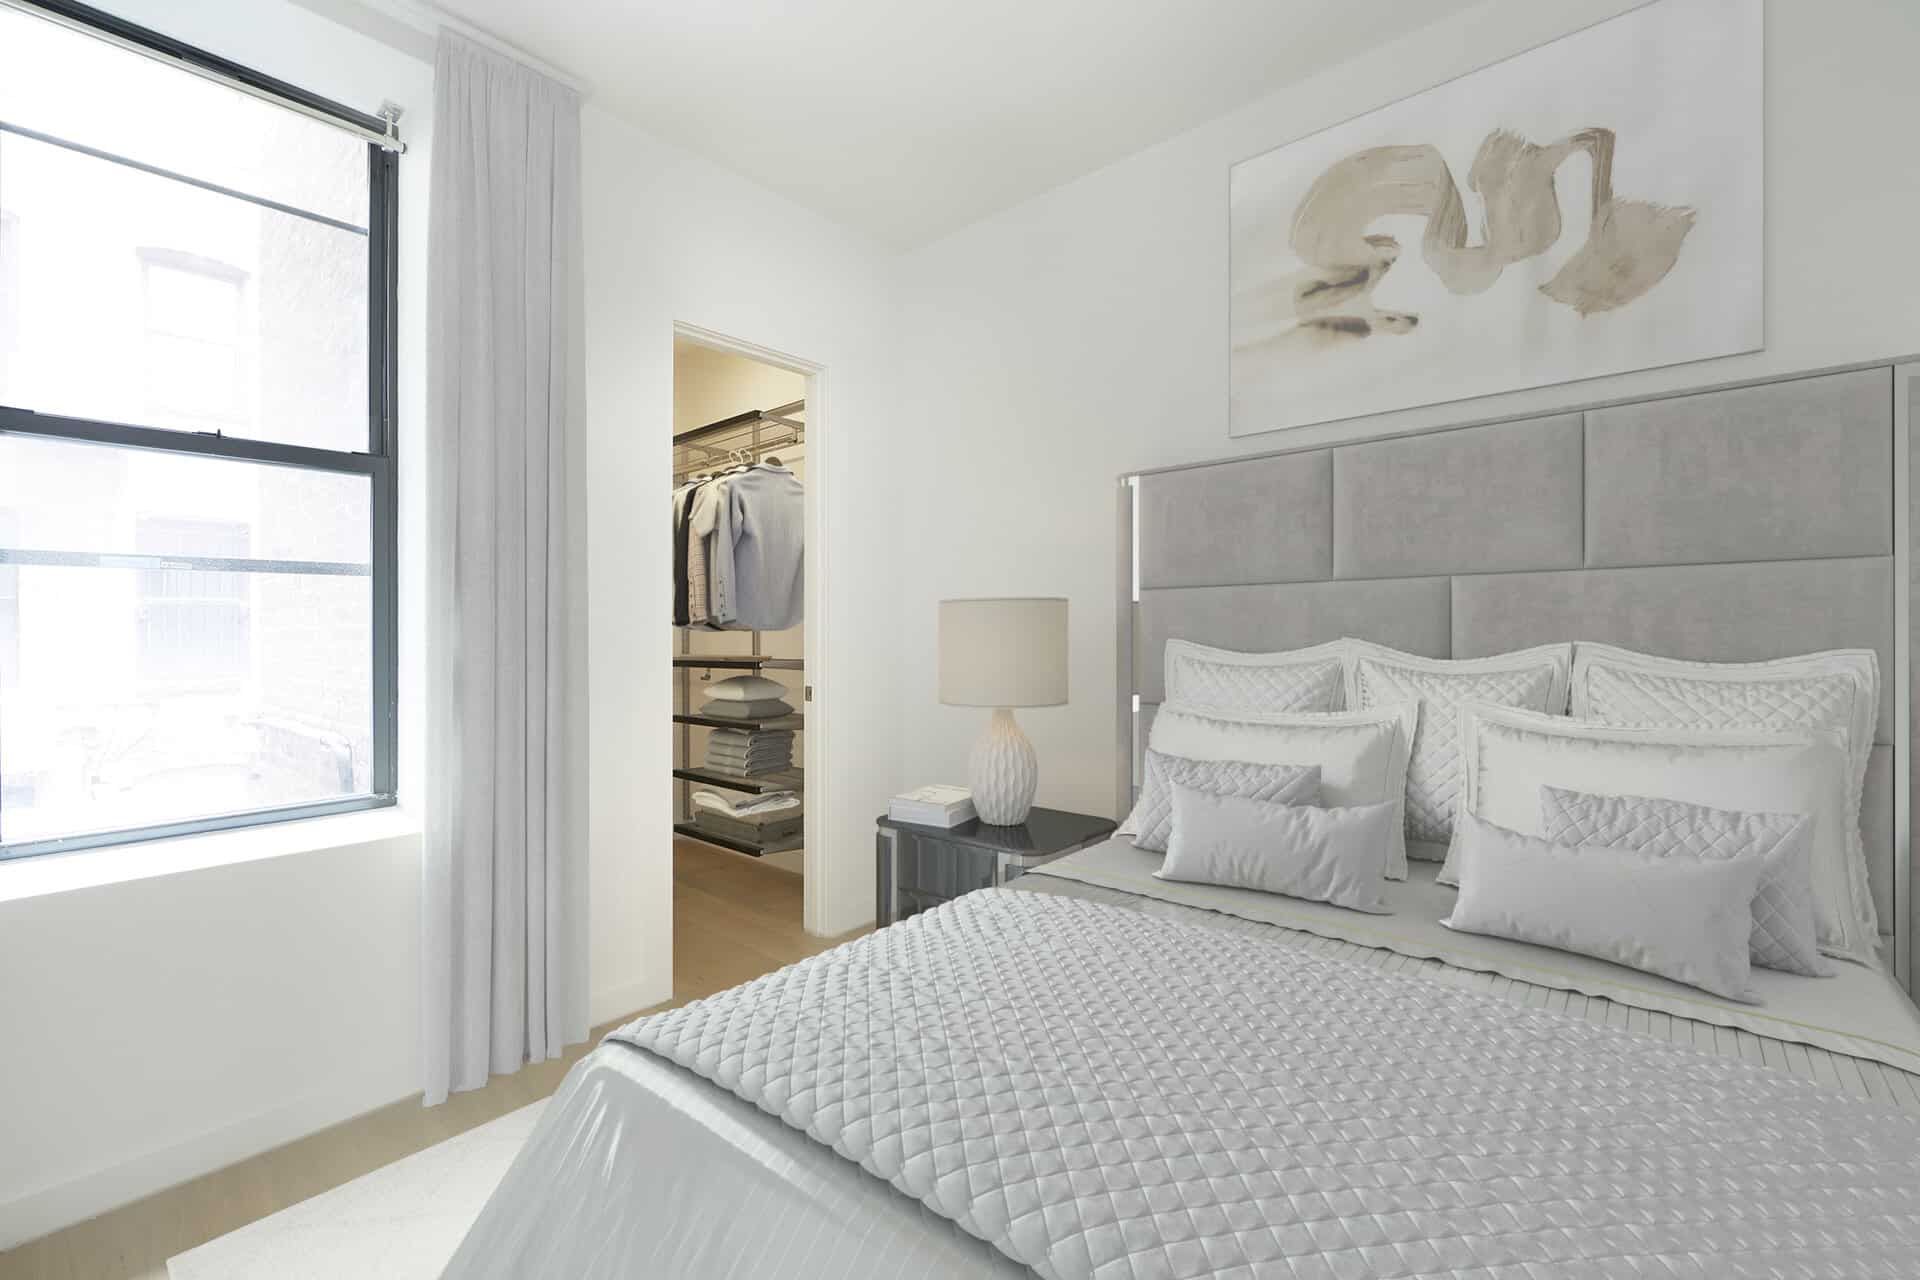 Bedroom at 244 East 7th Street in New York with walk-in closet, queen bed with headboard and large window for natural light.